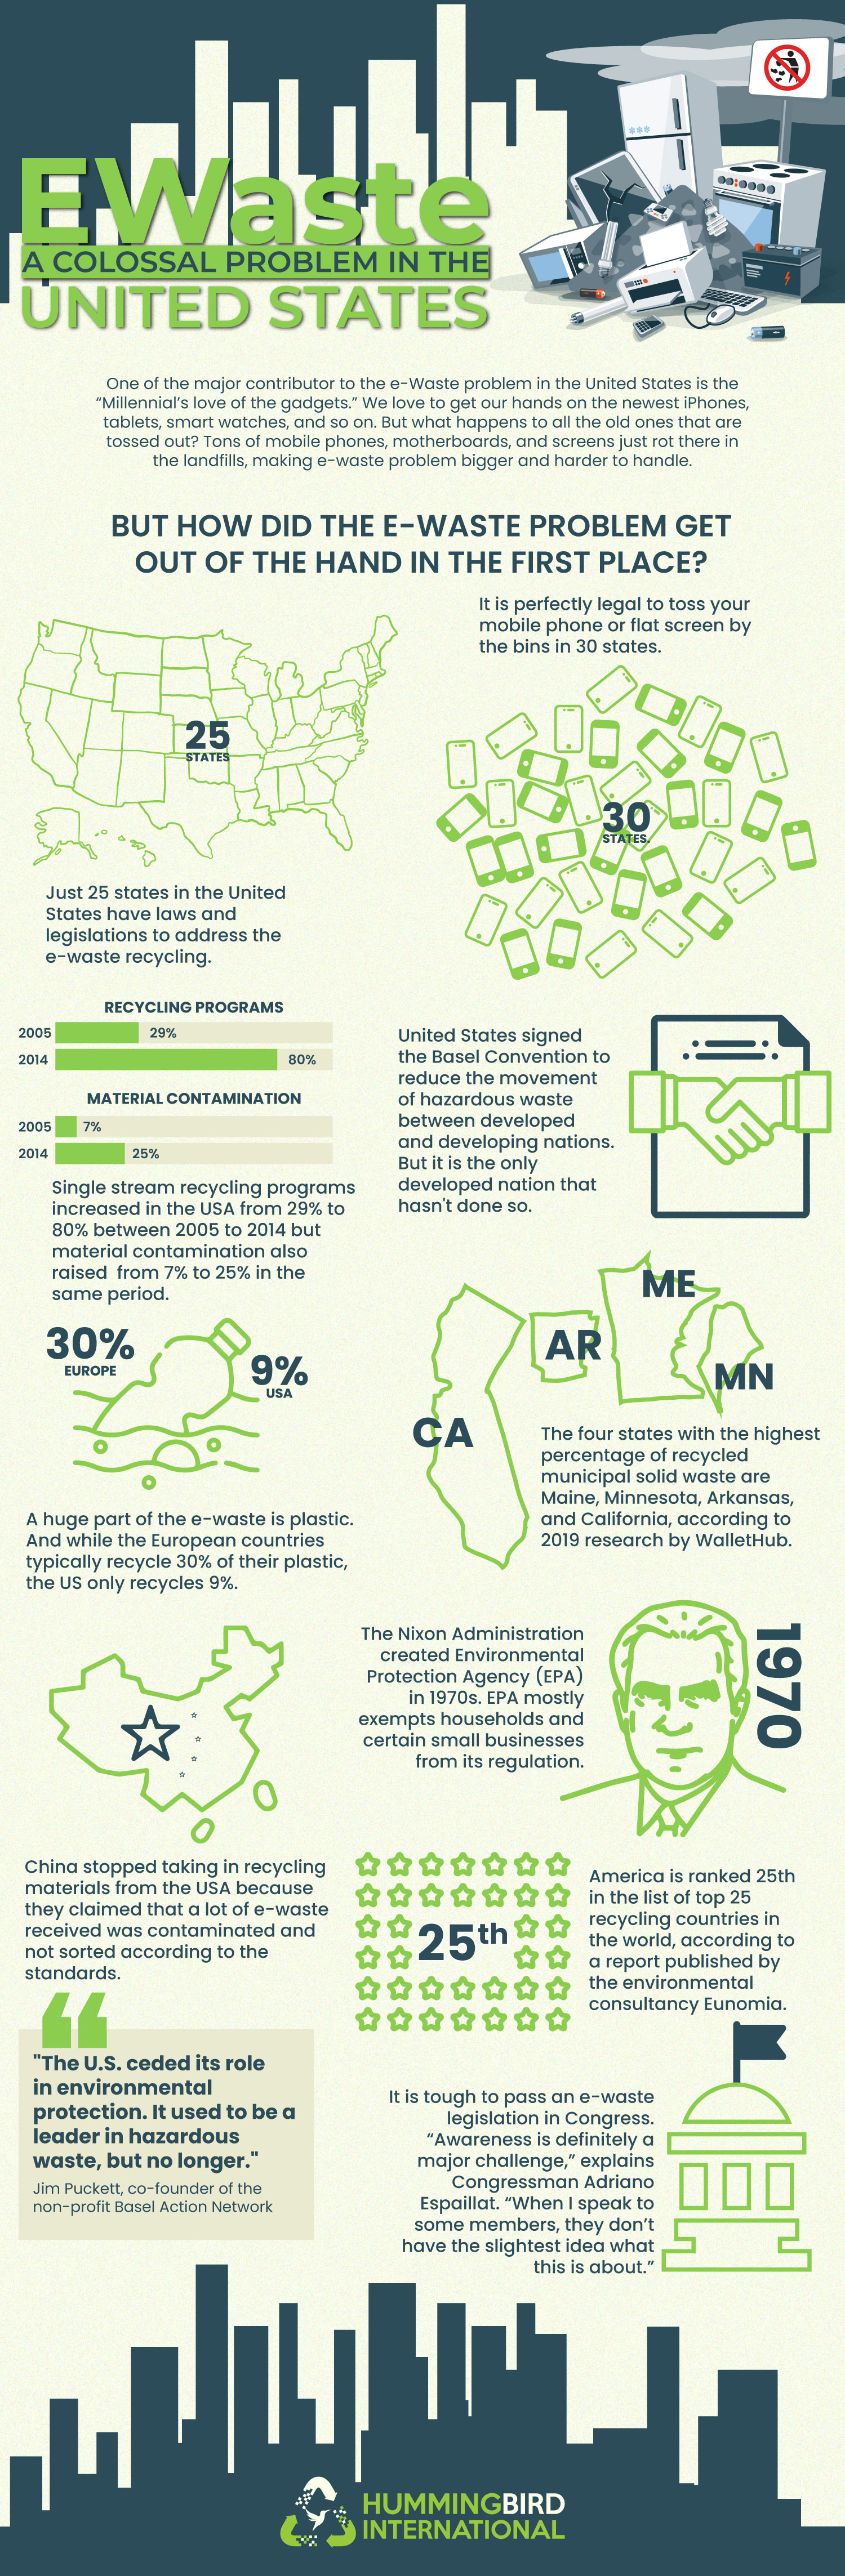 [INFOGRAPHIC]: E-Waste: A Colossal Problem In The United States